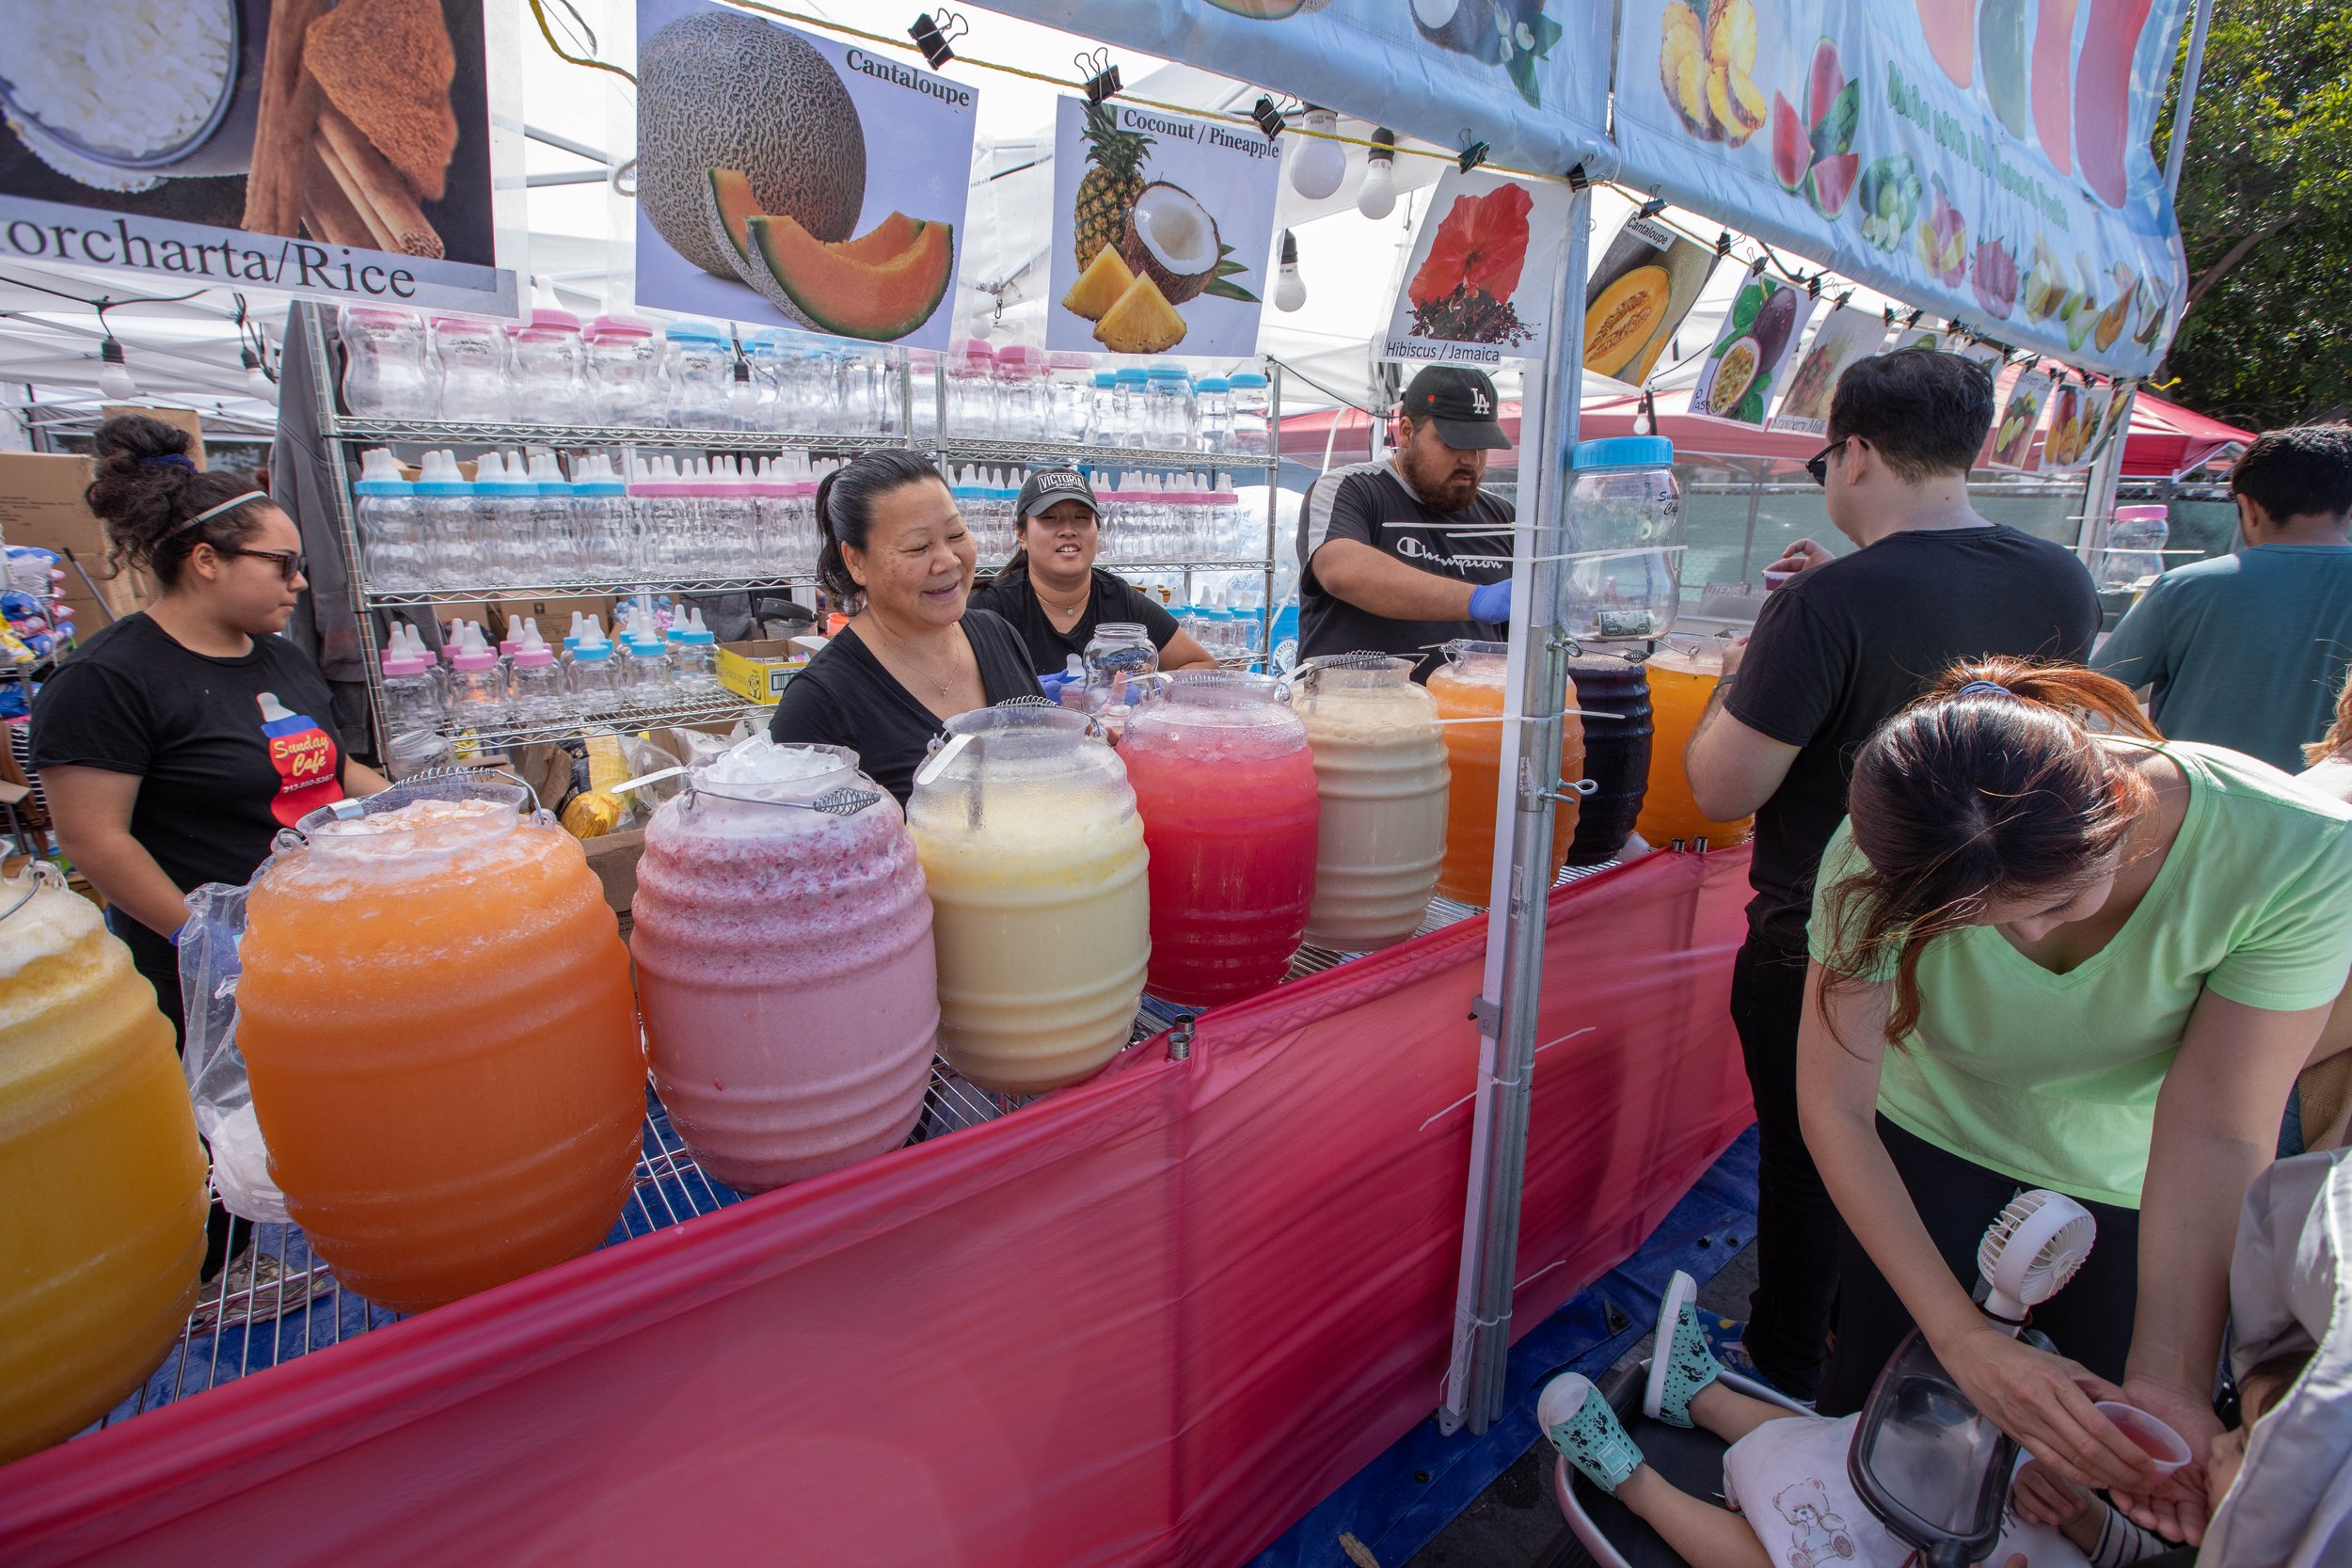  Diana Espinoza behind the counter enjoys the looks of the baby in front tasting a fresh watermelon juice sample. Inspired by famous nighttime bazaars of Asia, 626 Night Market Mini was established in 2012, this large-scale market is named after the 